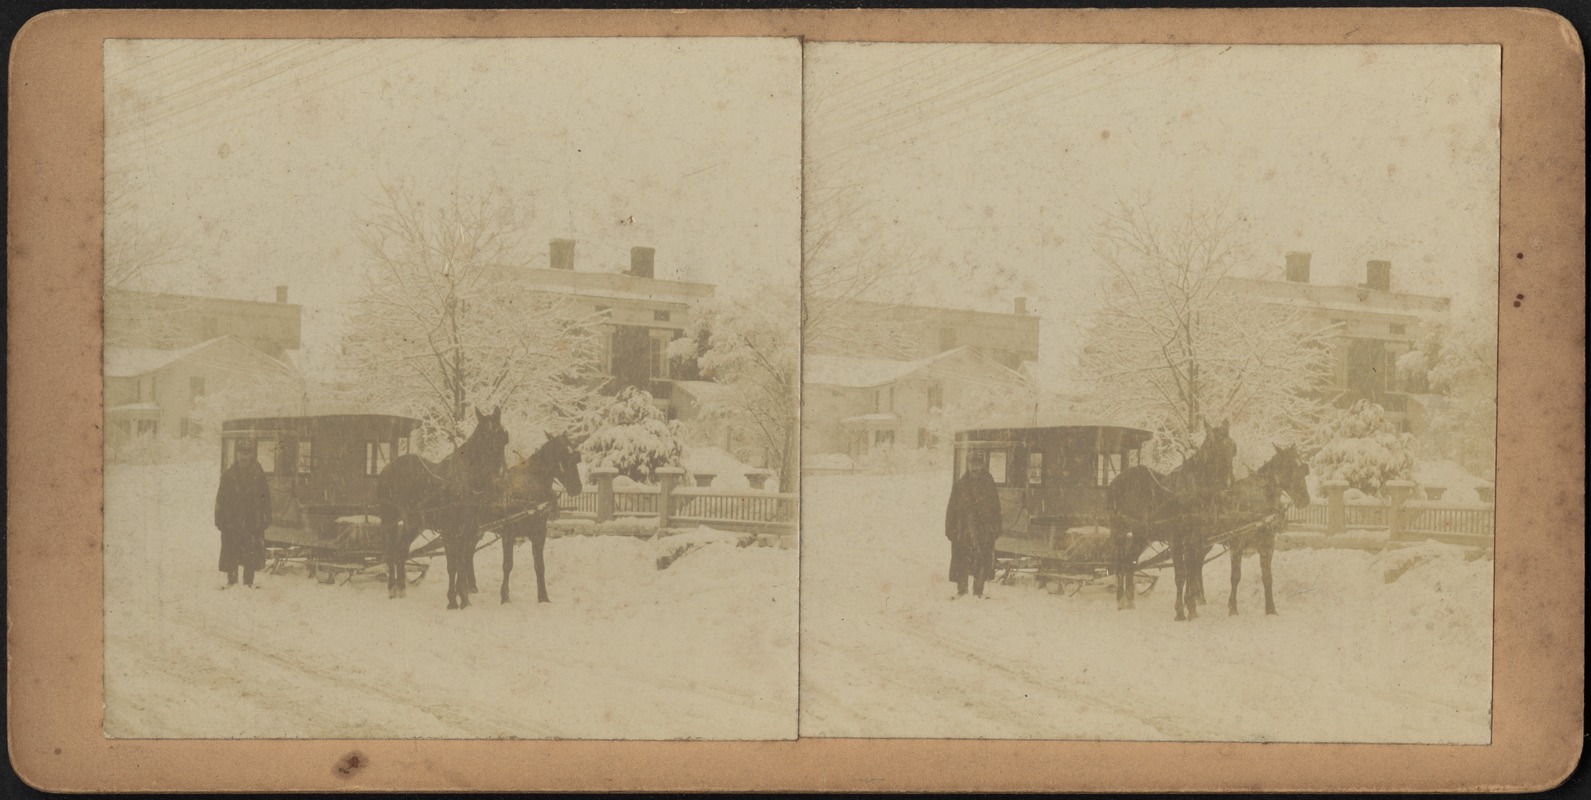 Driver and horse team with winter sleigh